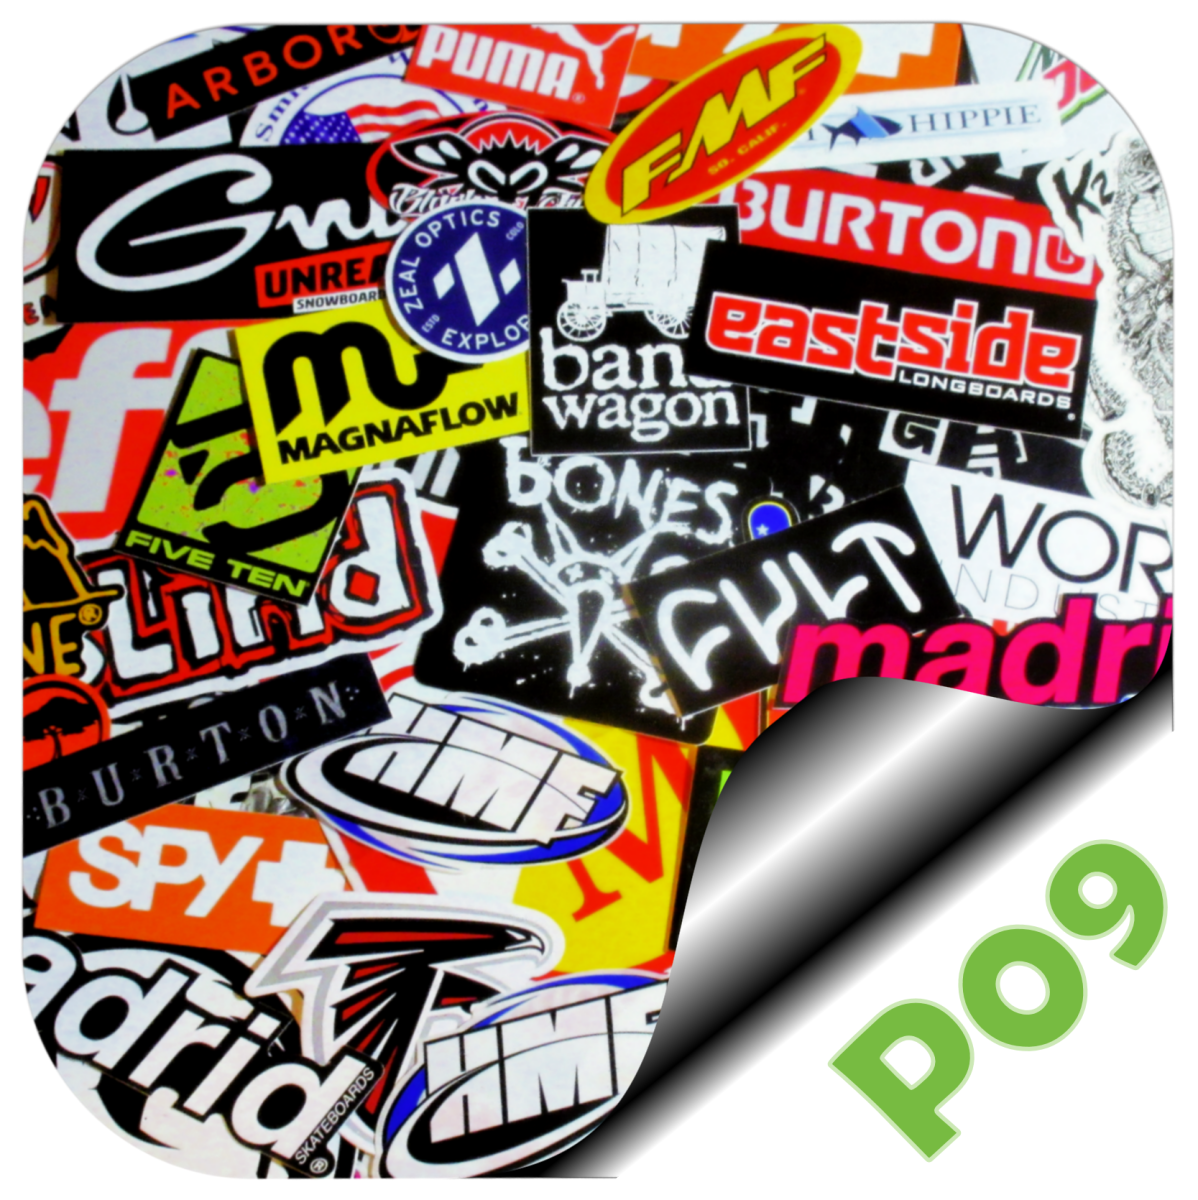 These Companies Will Send You Free Stickers [#09]